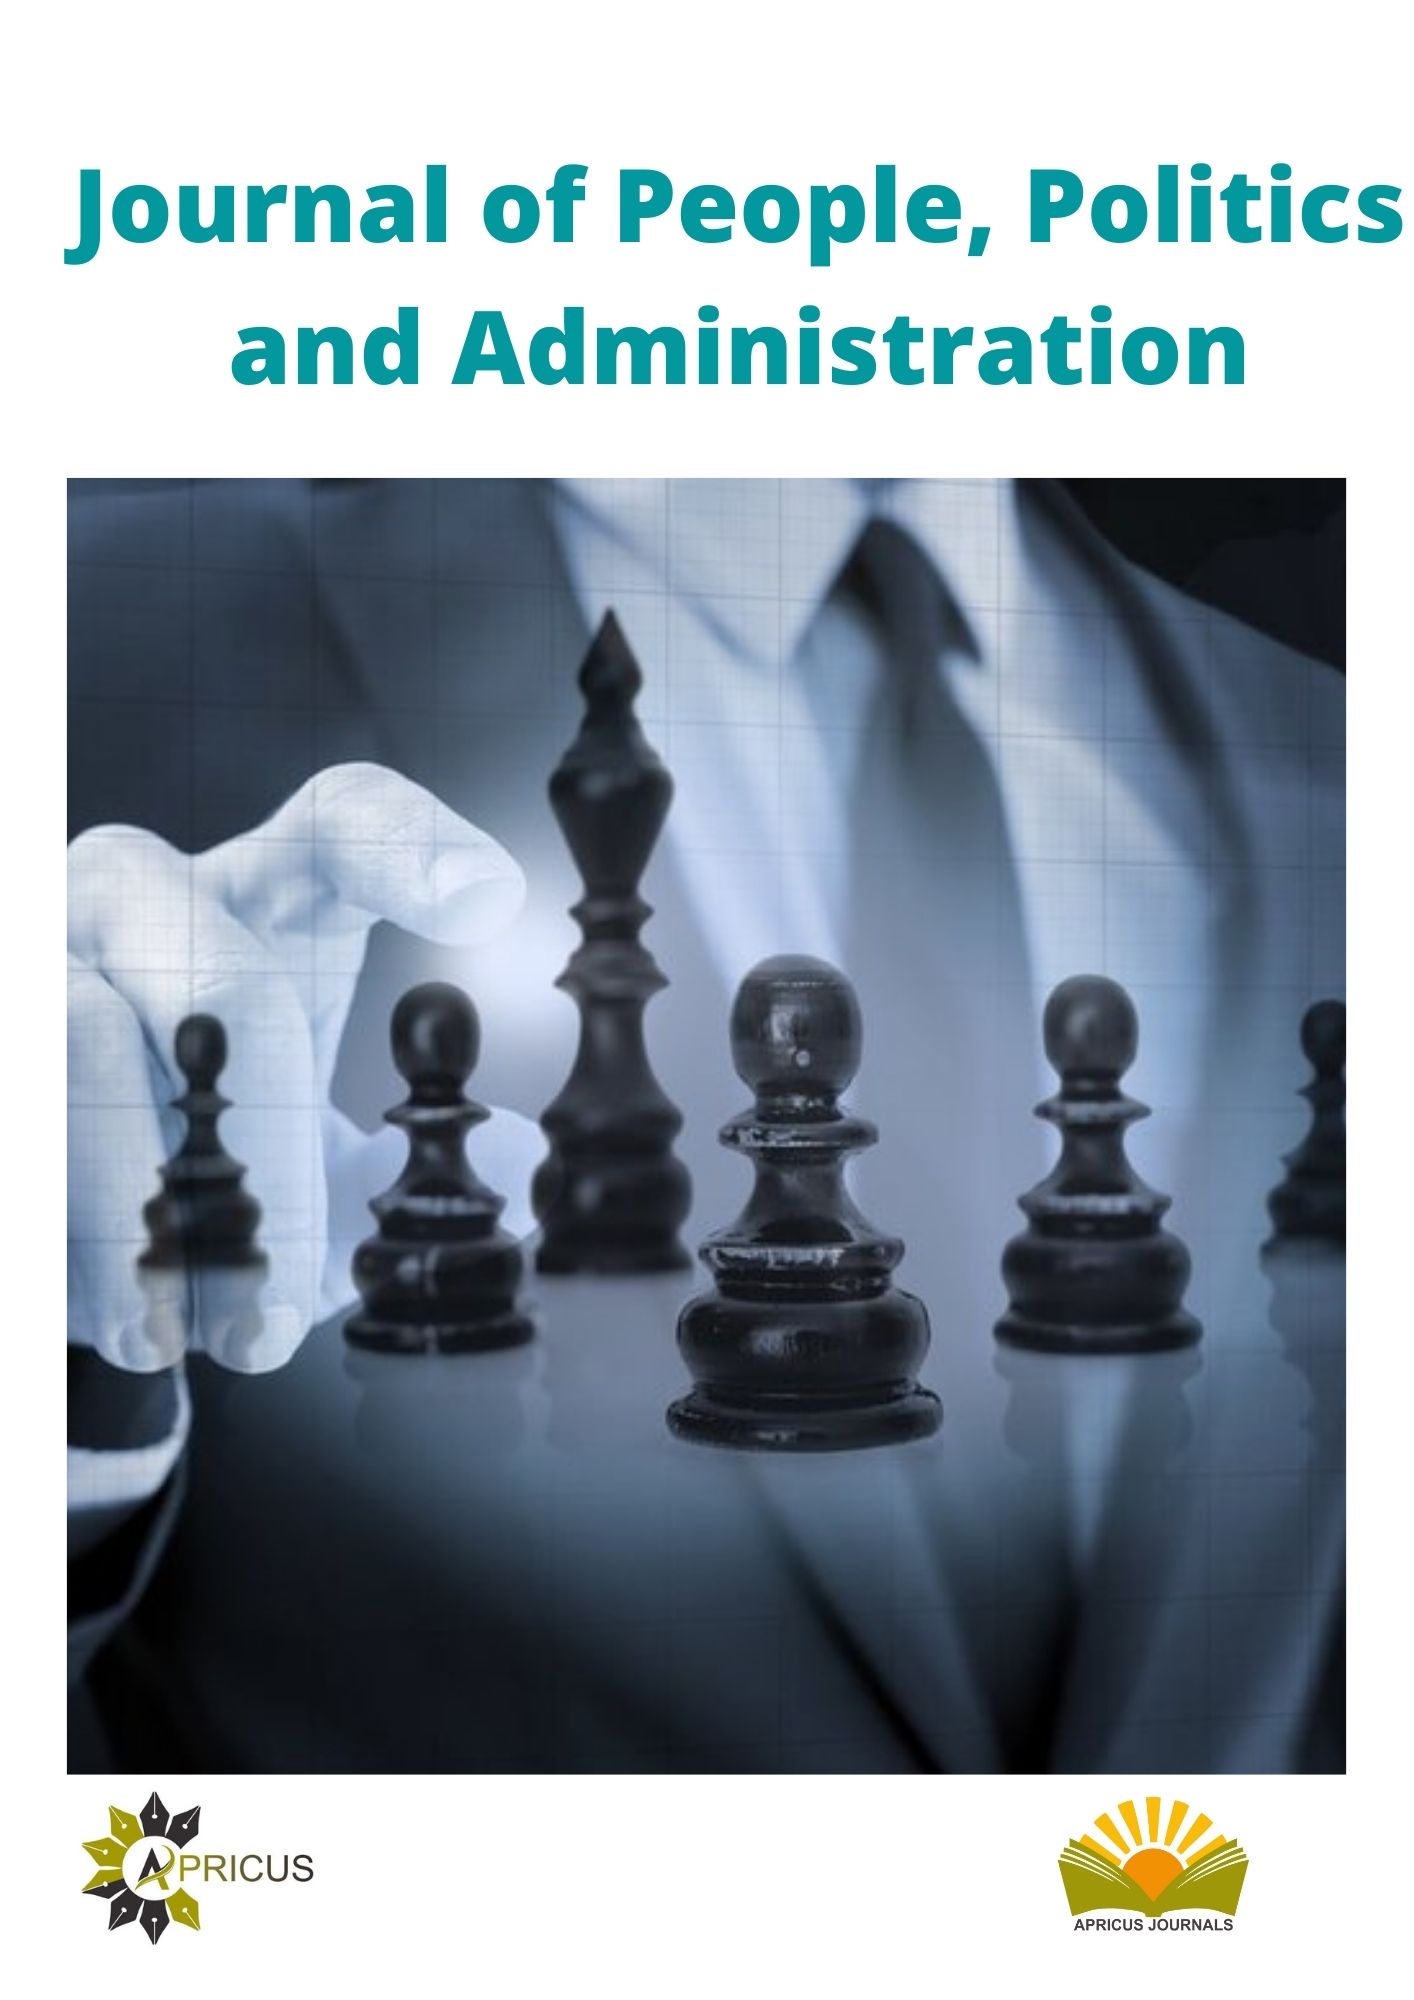  Journal of People, Politics and Administration Journal of People, Politics and Administration 